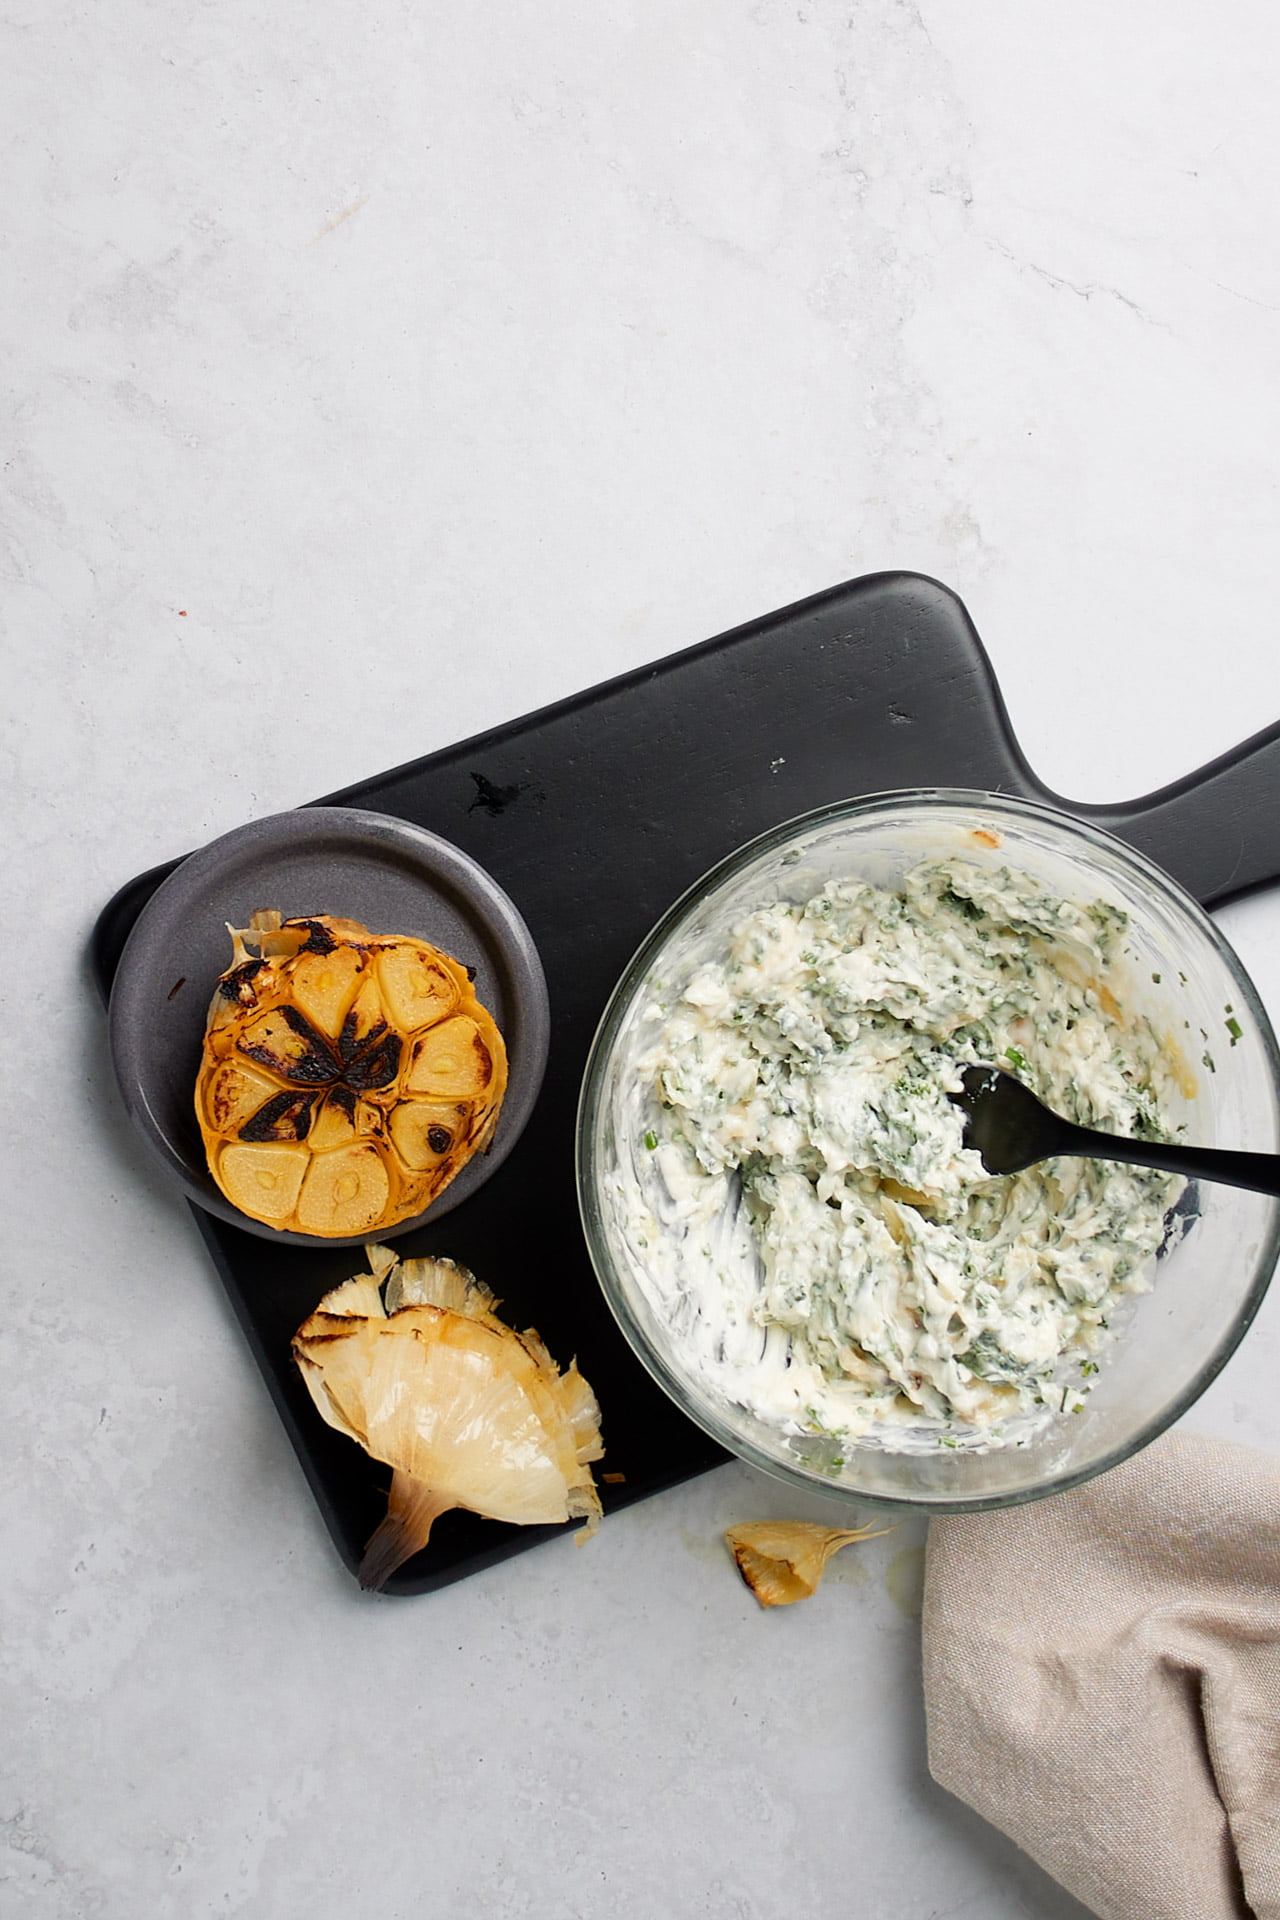 A bowl of creamy dip with green herbs sits on a black cutting board. Beside it, there is a halved, charred garlic bulb and a piece of what appears to be yellow onion skin. Featuring ingredients similar to those in our sheet pan gnocchi recipe, this savory spread pairs perfectly with herbed butter.